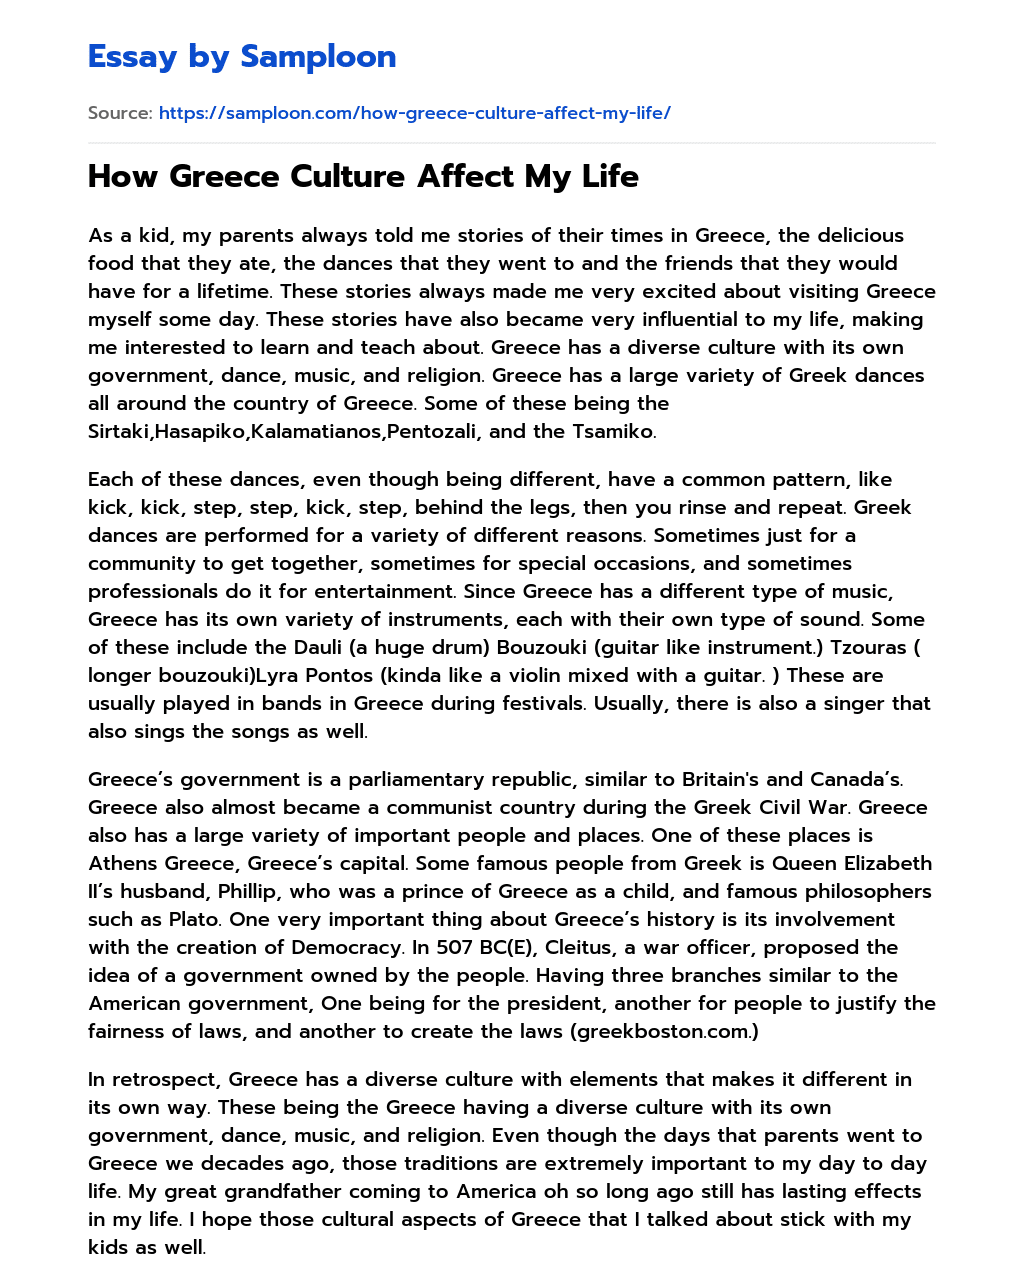 How Greece Culture Affect My Life essay